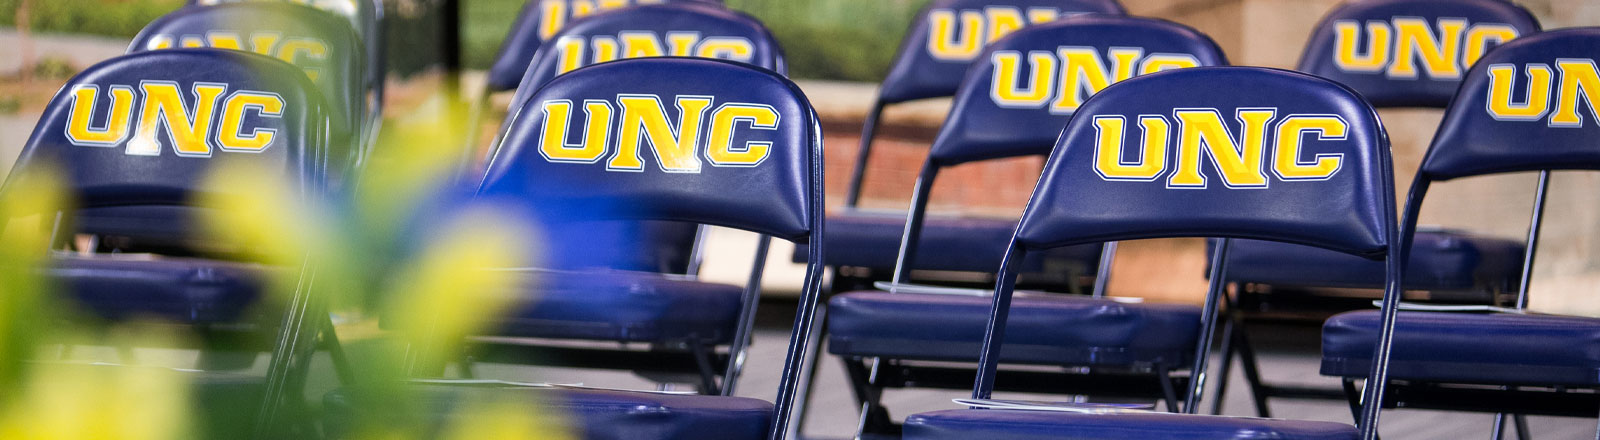 Photo of UNC logo chairs at graduation